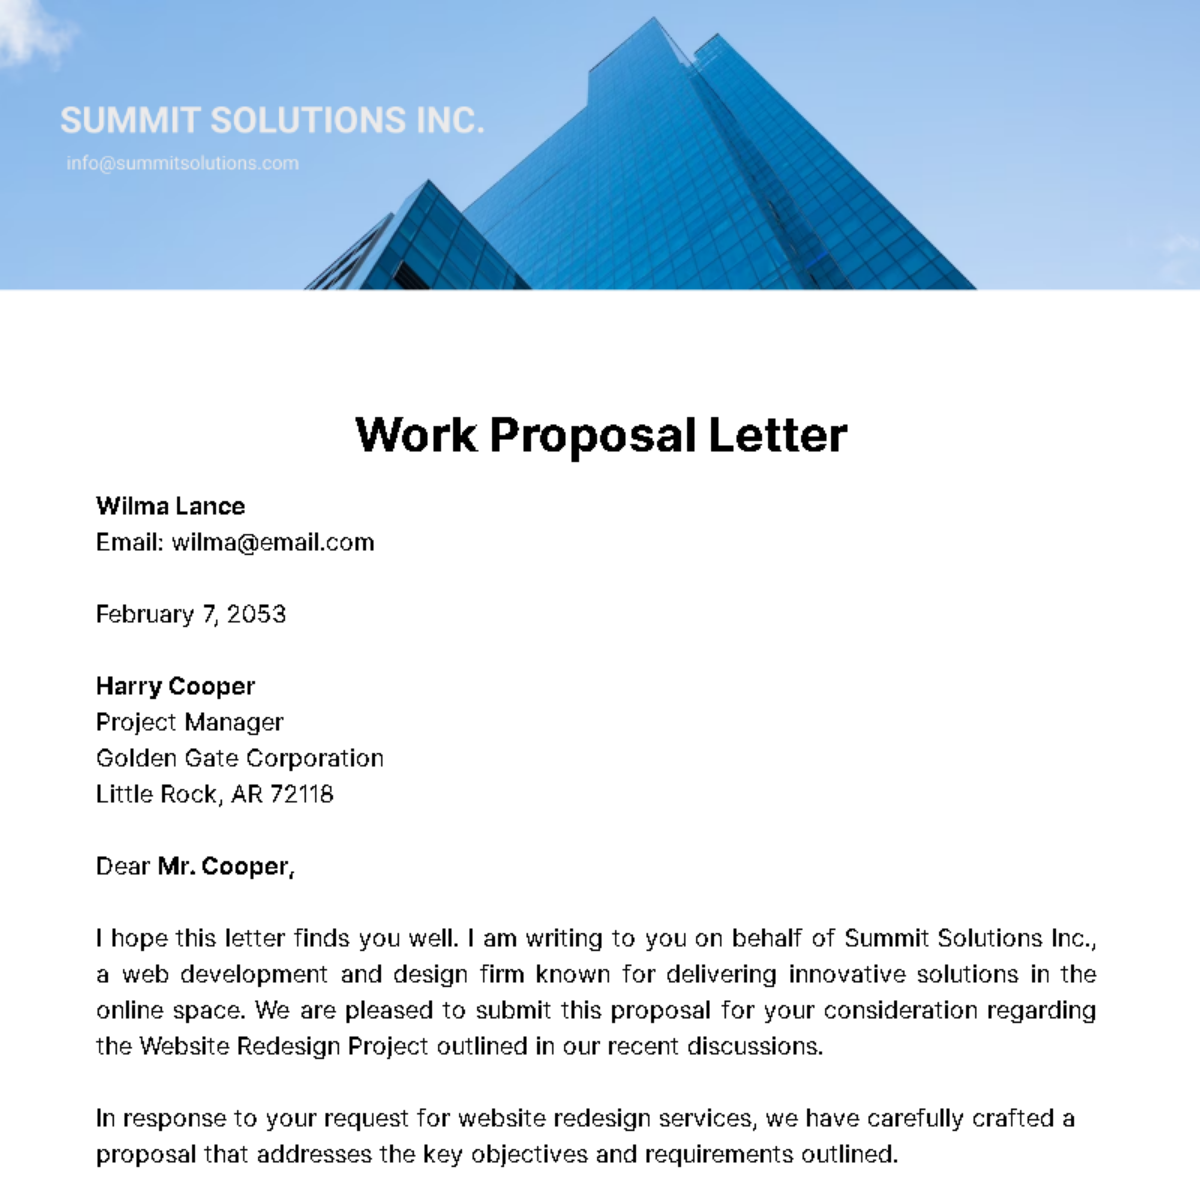 Work Proposal Letter  Template